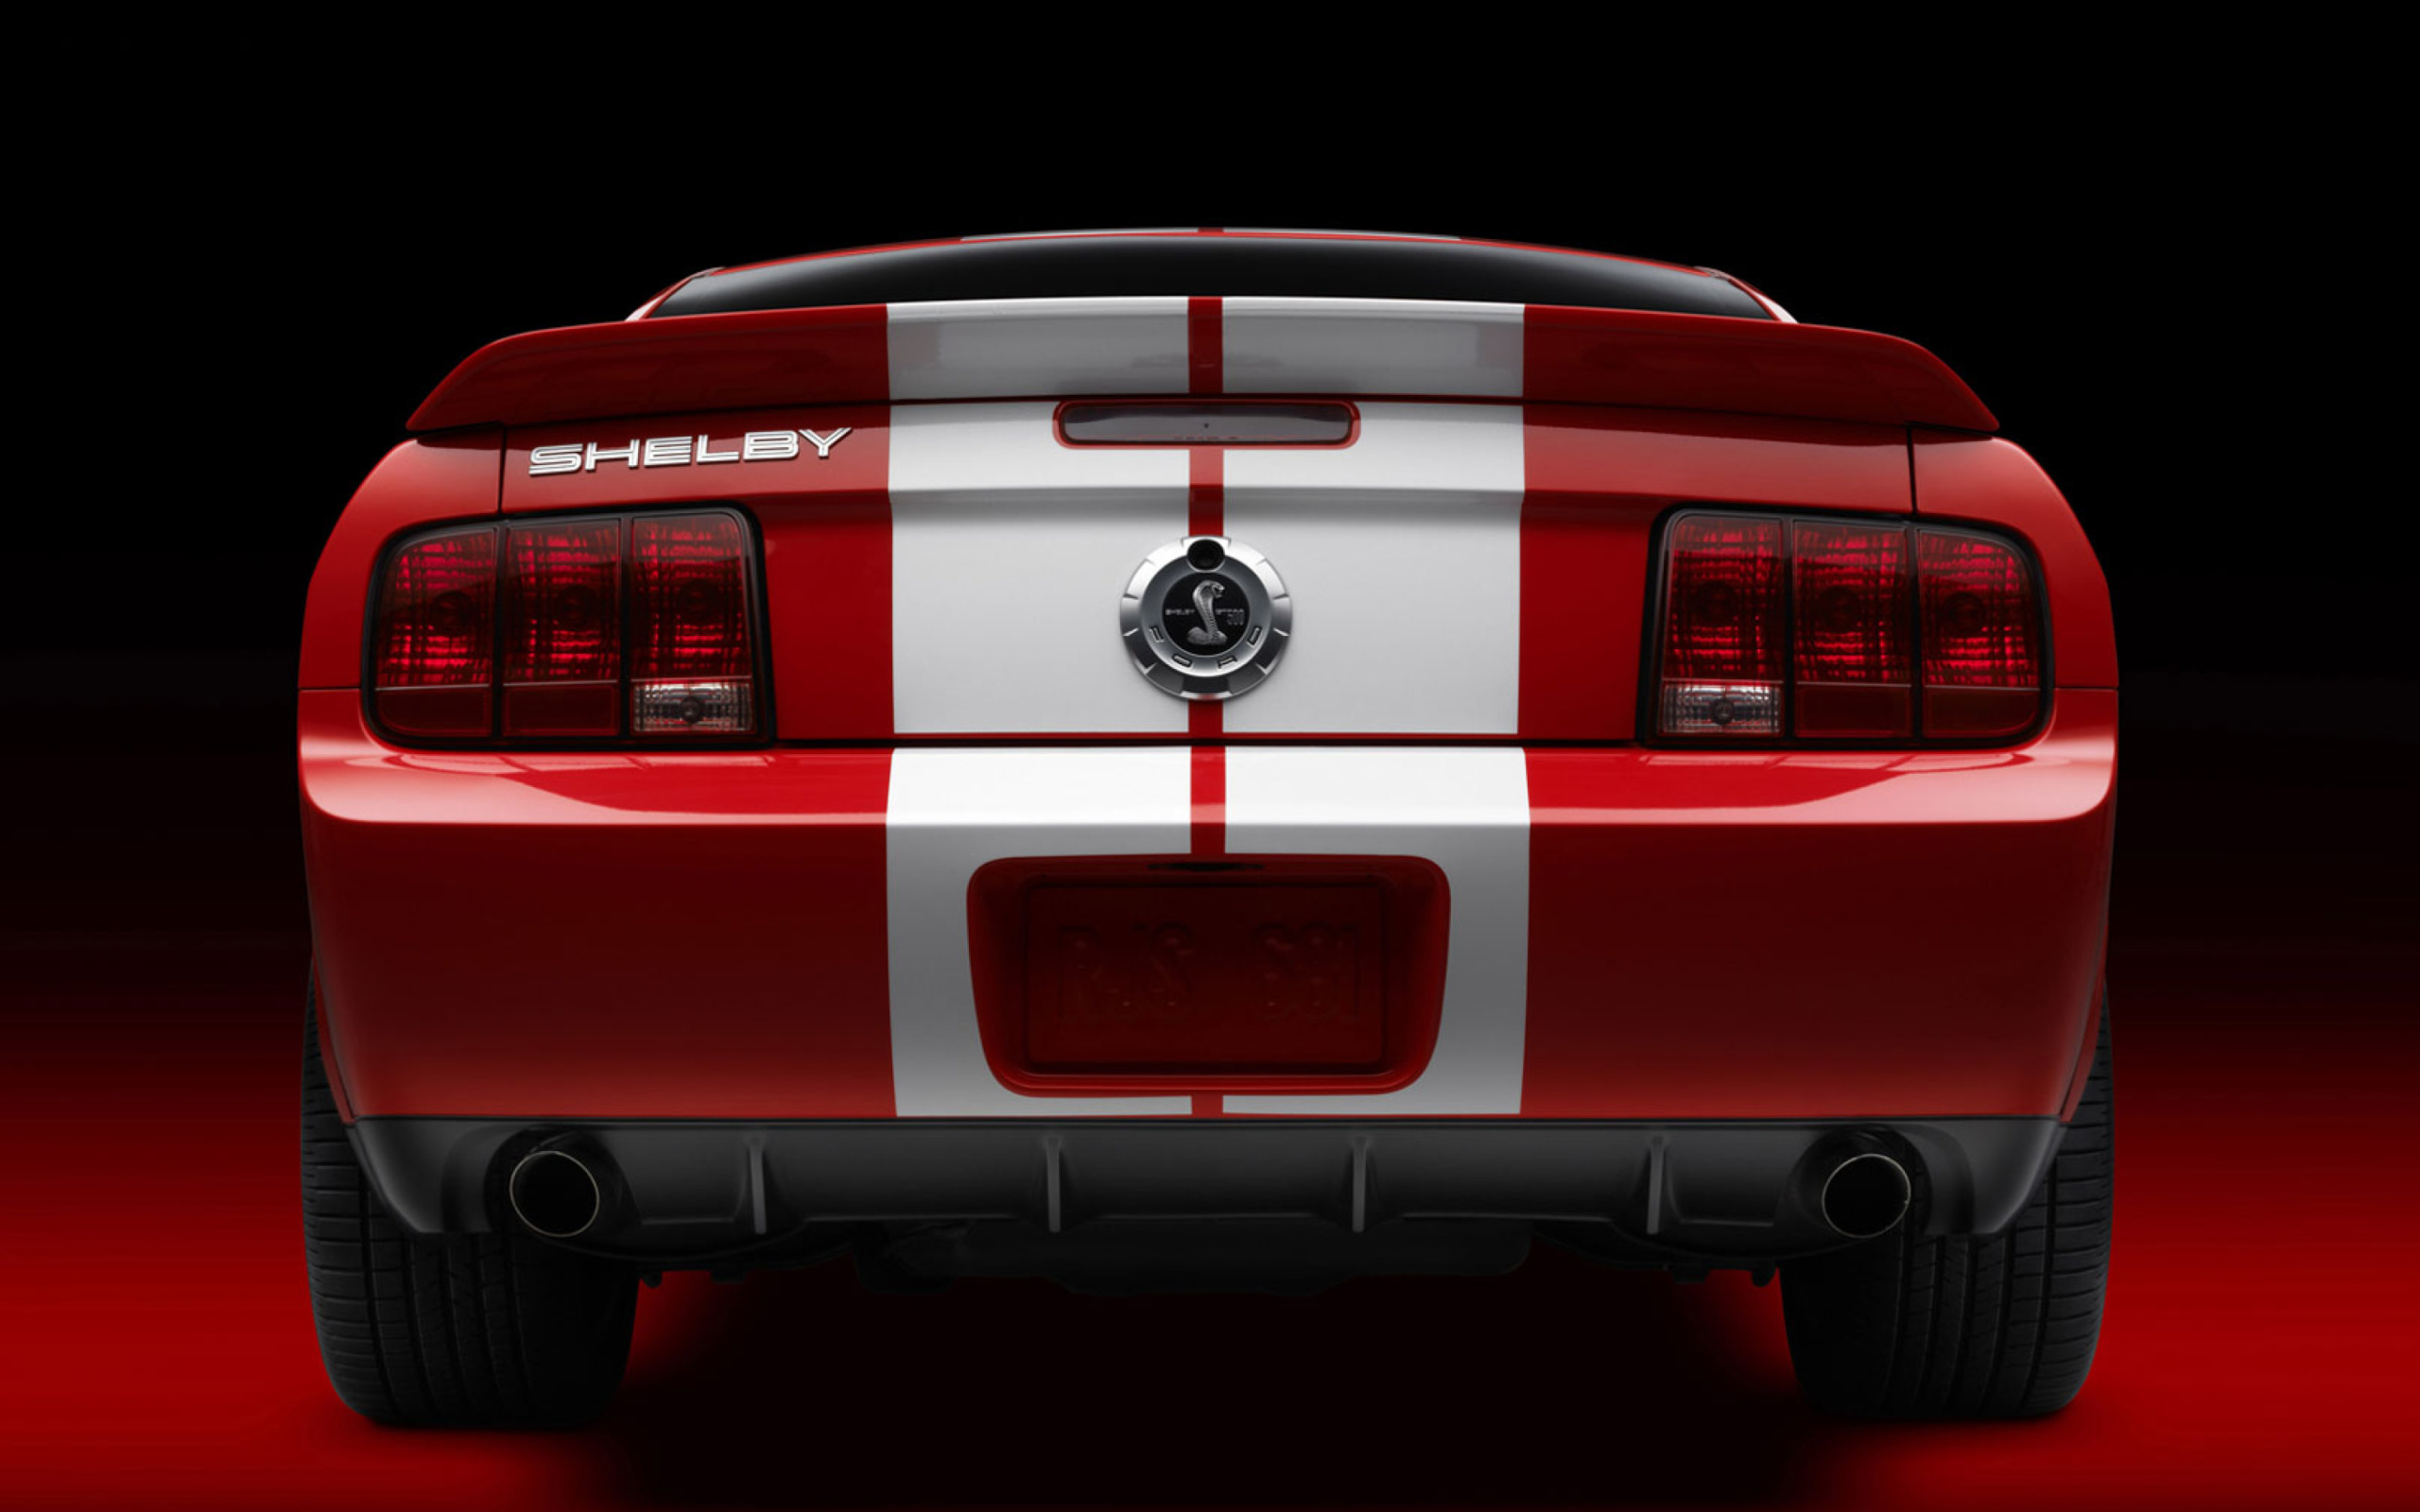 Ford Mustang Shelby GT500 wallpaper 2560x1600